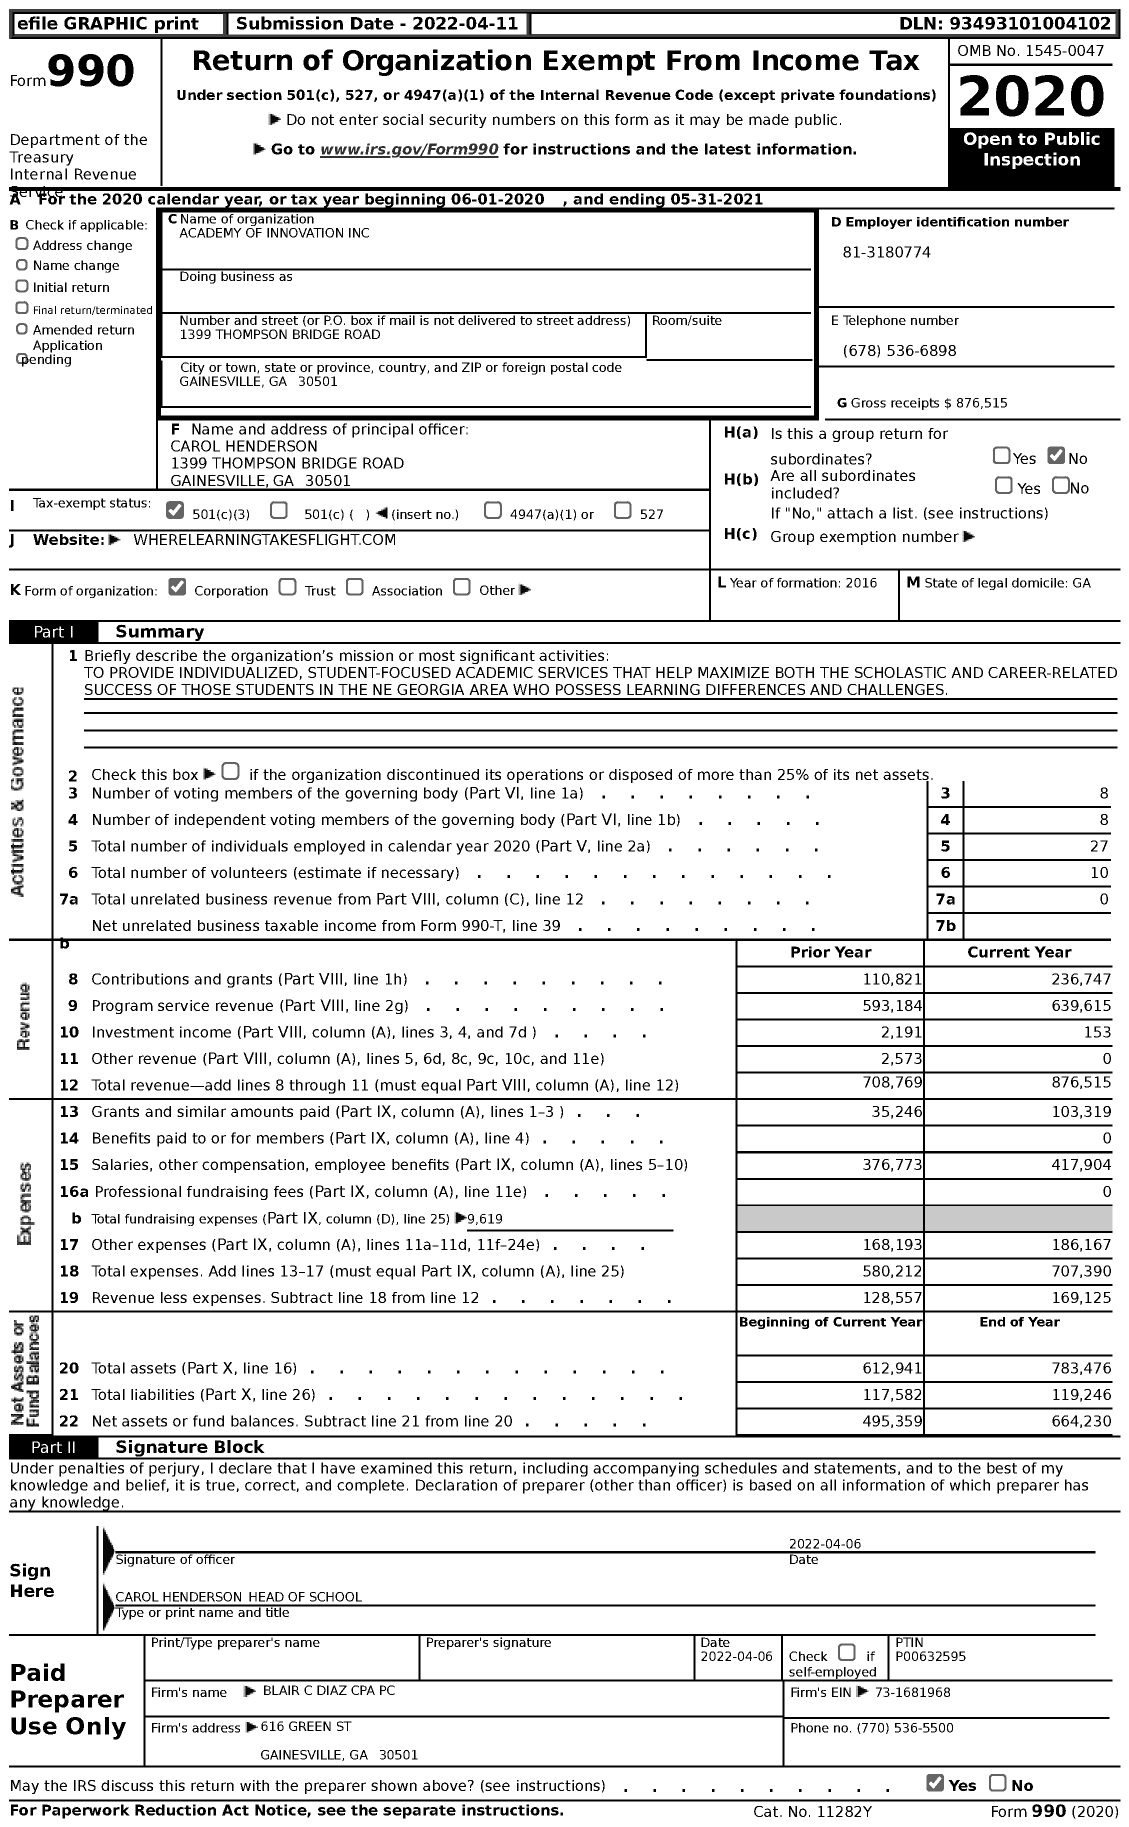 Image of first page of 2020 Form 990 for Academy of Innovation